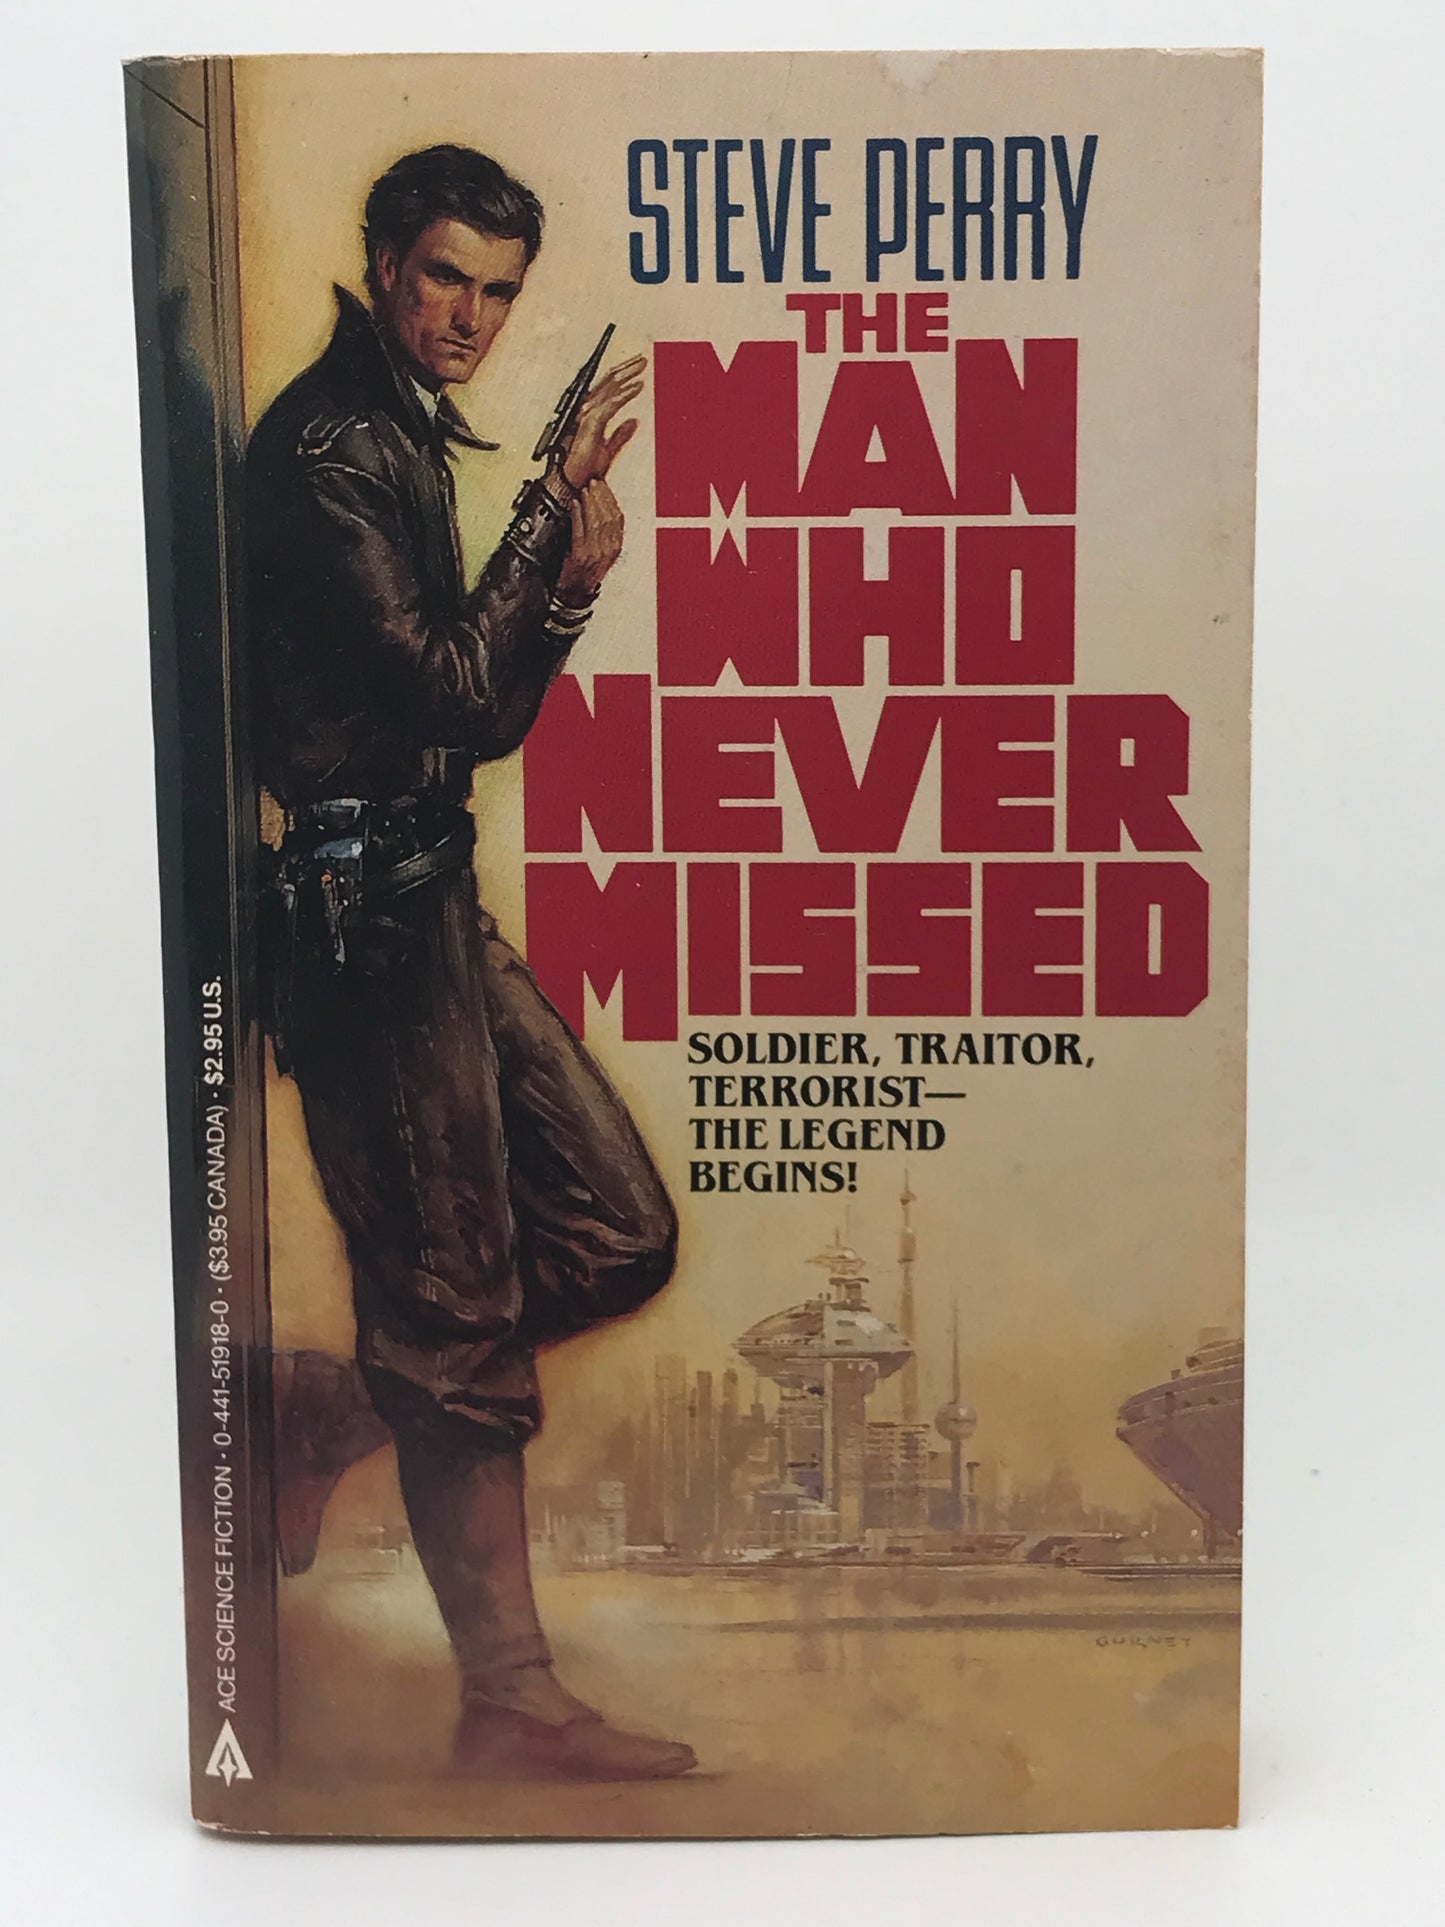 Man Who Never Missed ACE Paperback Steve Perry SF03